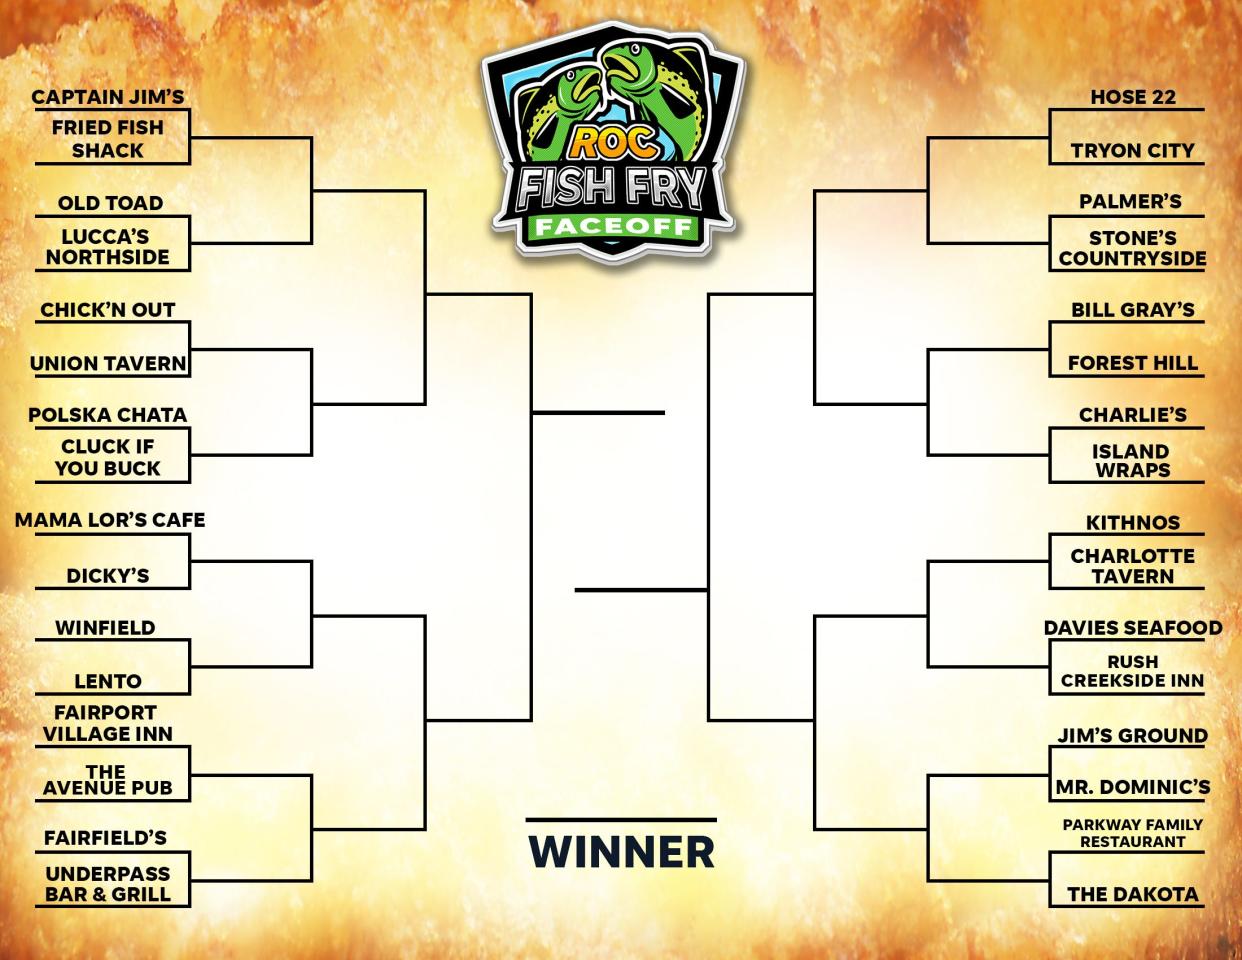 The 2023 ROC Fish Fry Faceoff bracket of 2023.